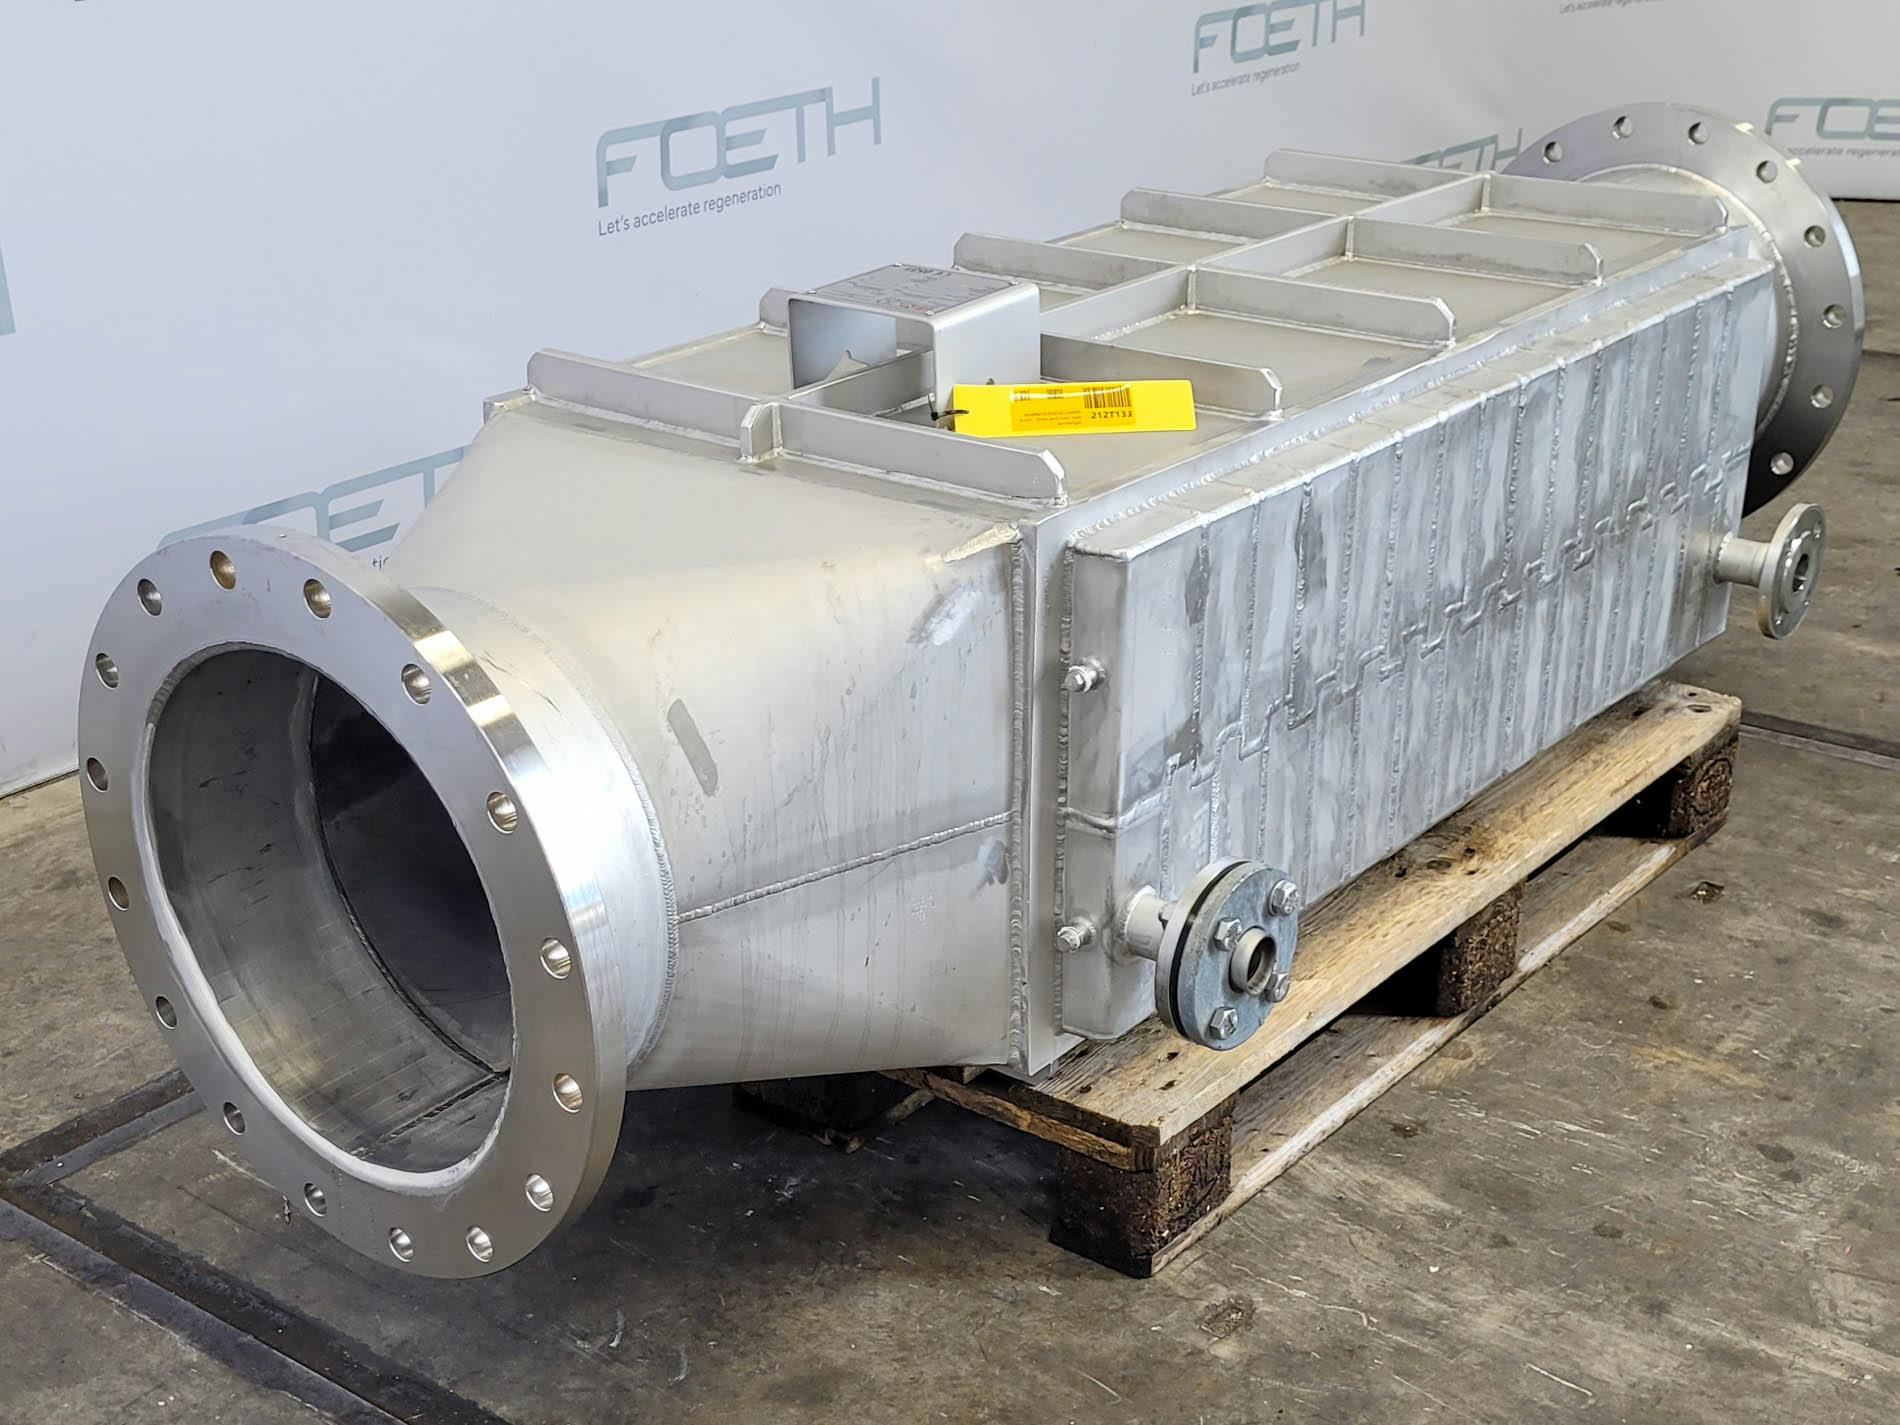 Enco "Finned / Rippenrohr" - Shell and tube heat exchanger - image 4